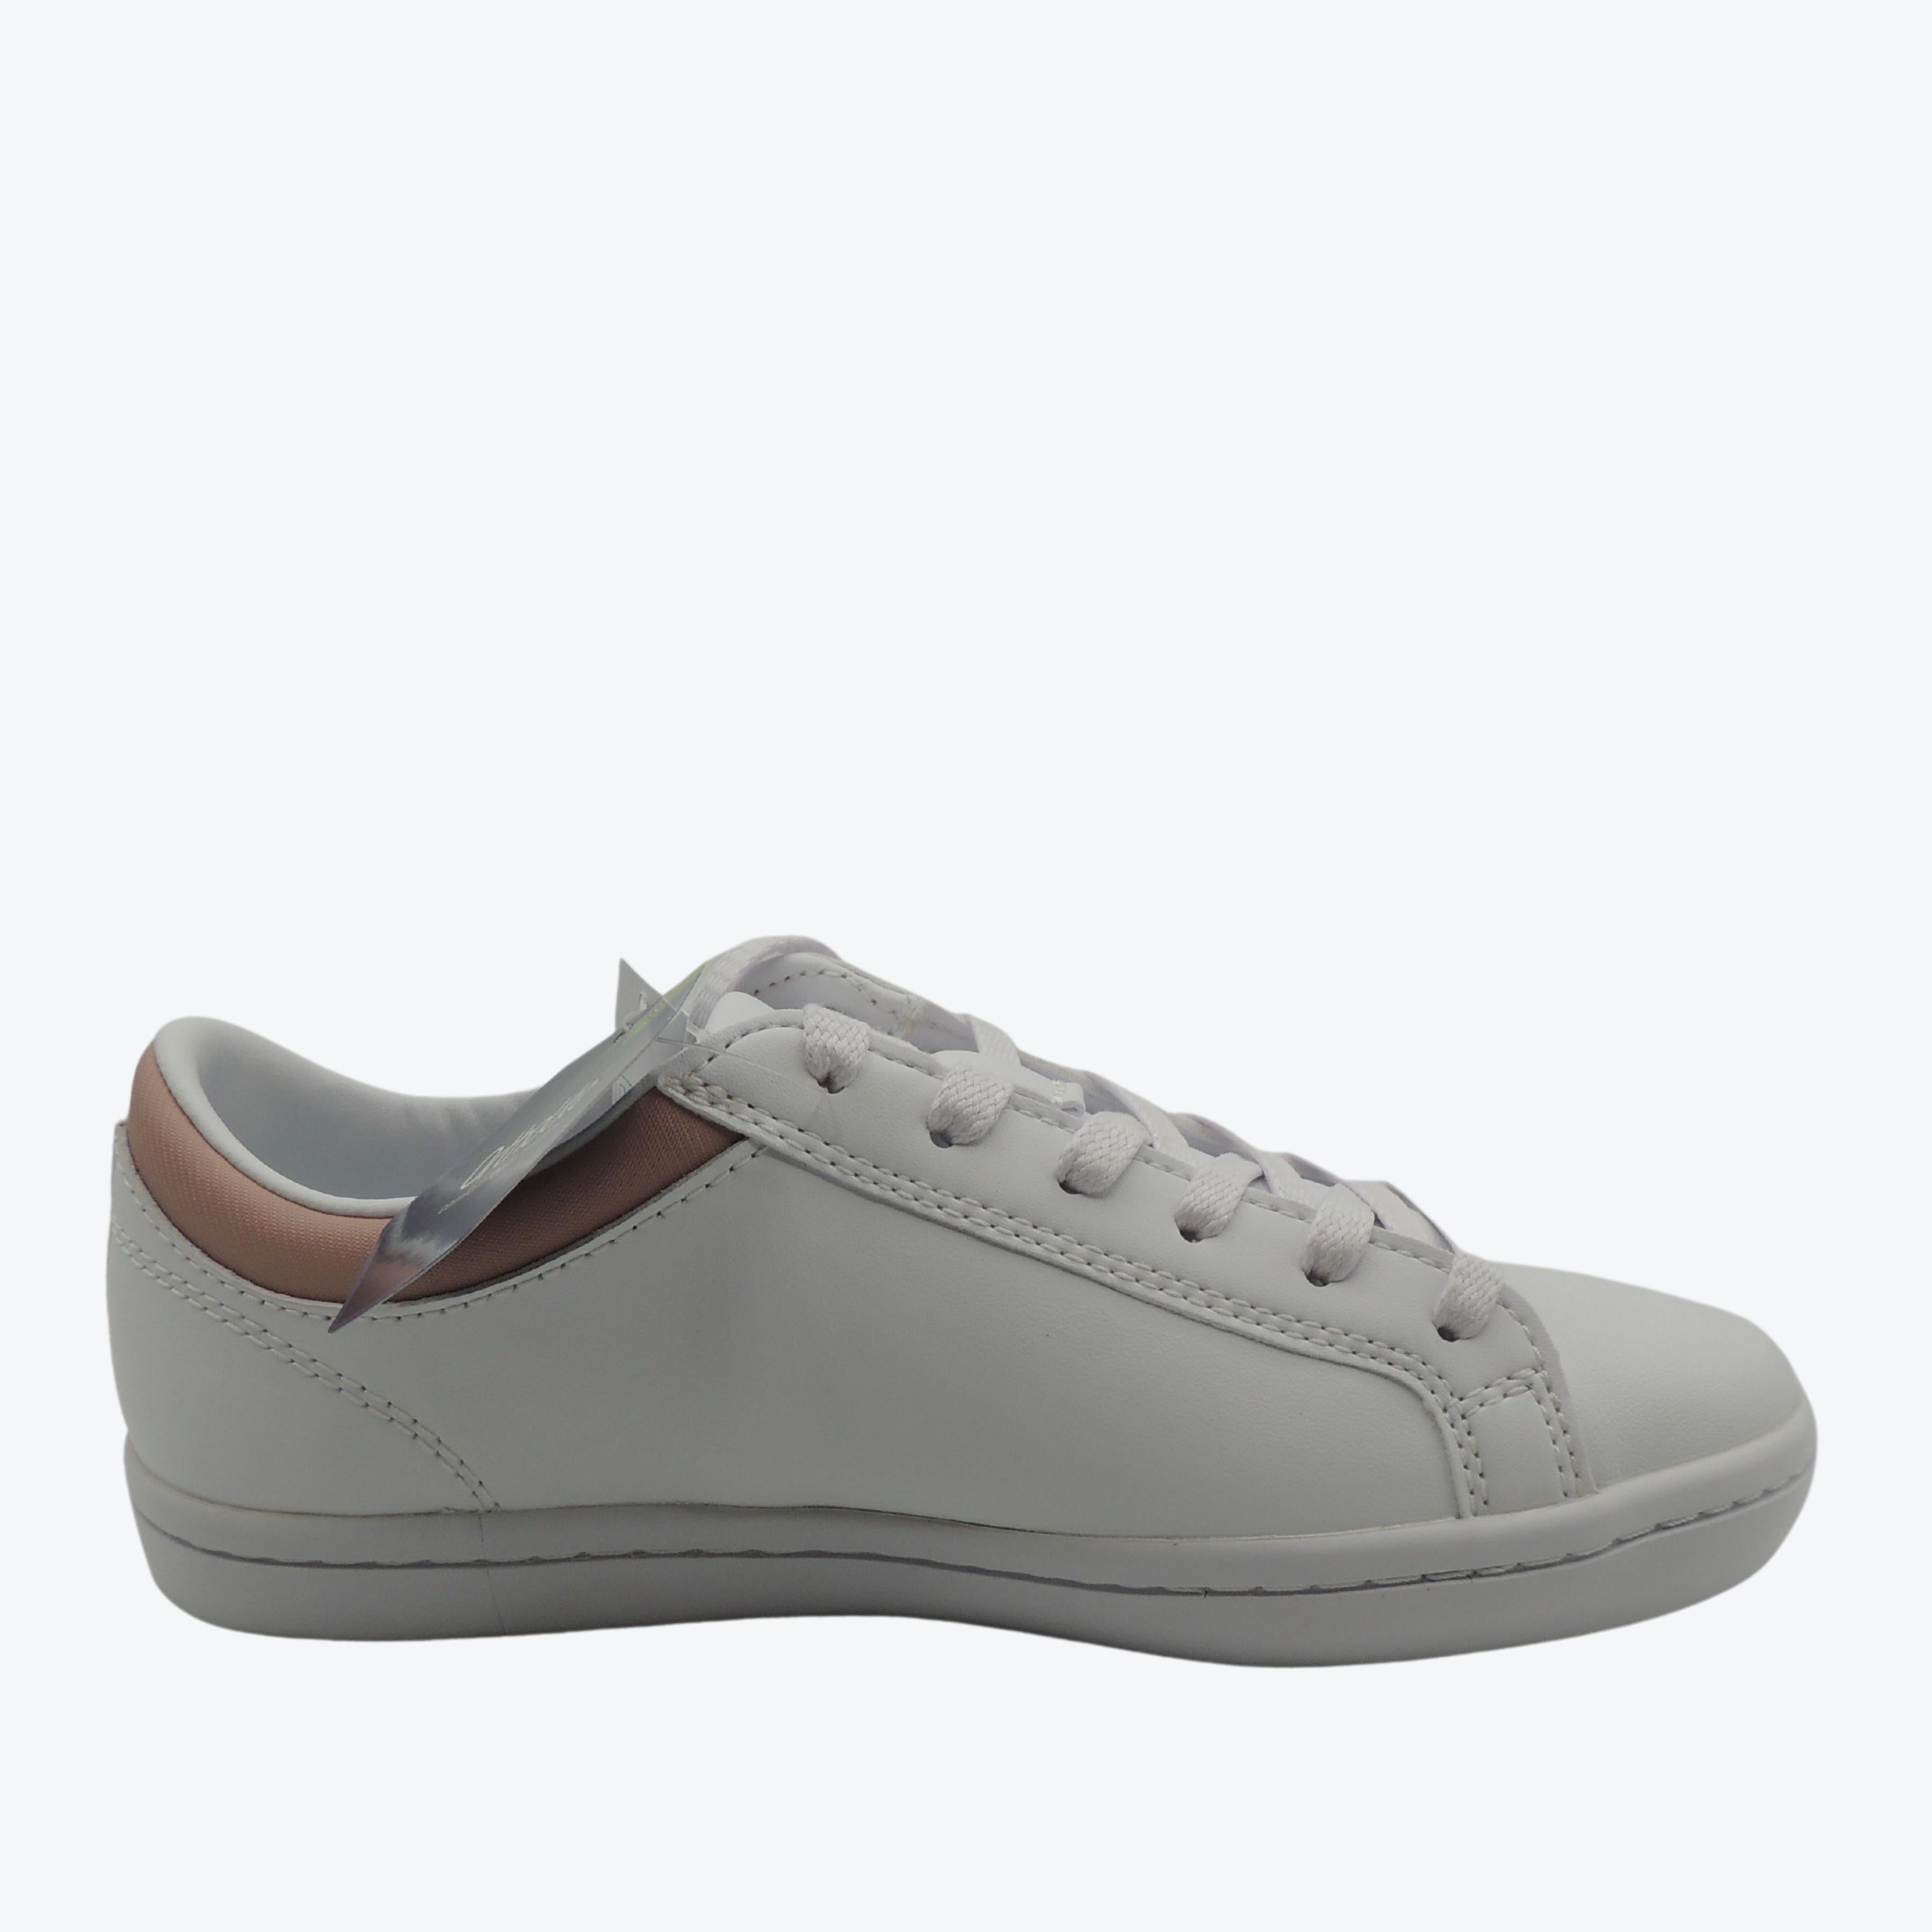 Lacoste Straightset Trainers in White/Pink